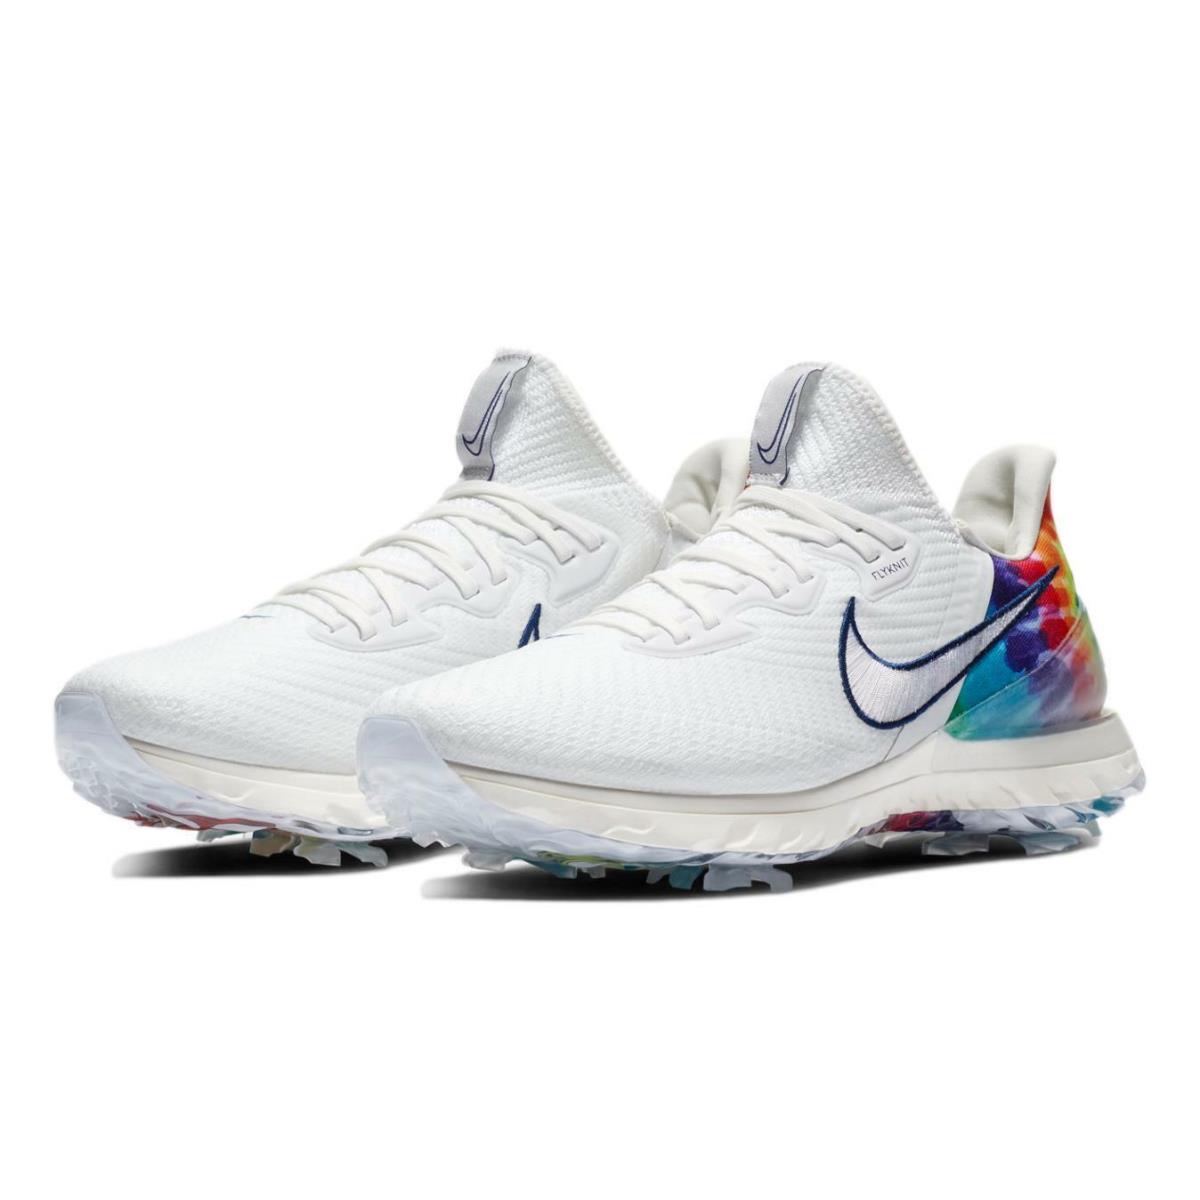 Nike Air Zoom Infinity Tour Nrg P `peace Love` Tie Dye Golf Shoes CT3732-100 - White